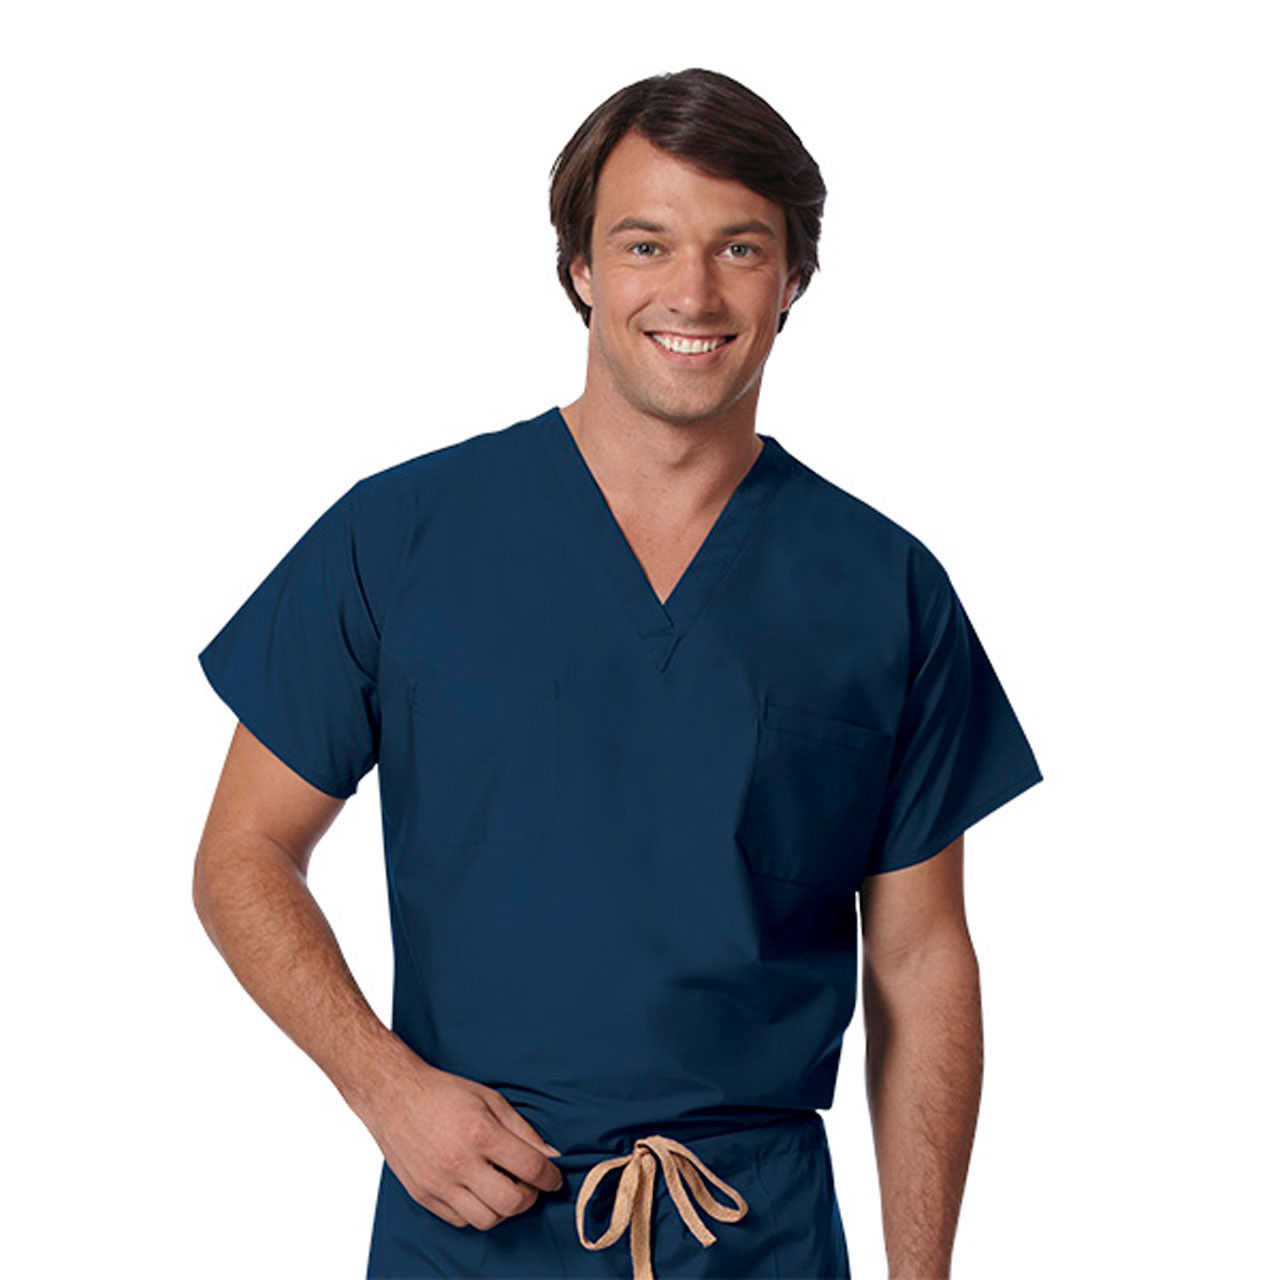 Do the navy surgical scrubs come with any pockets?